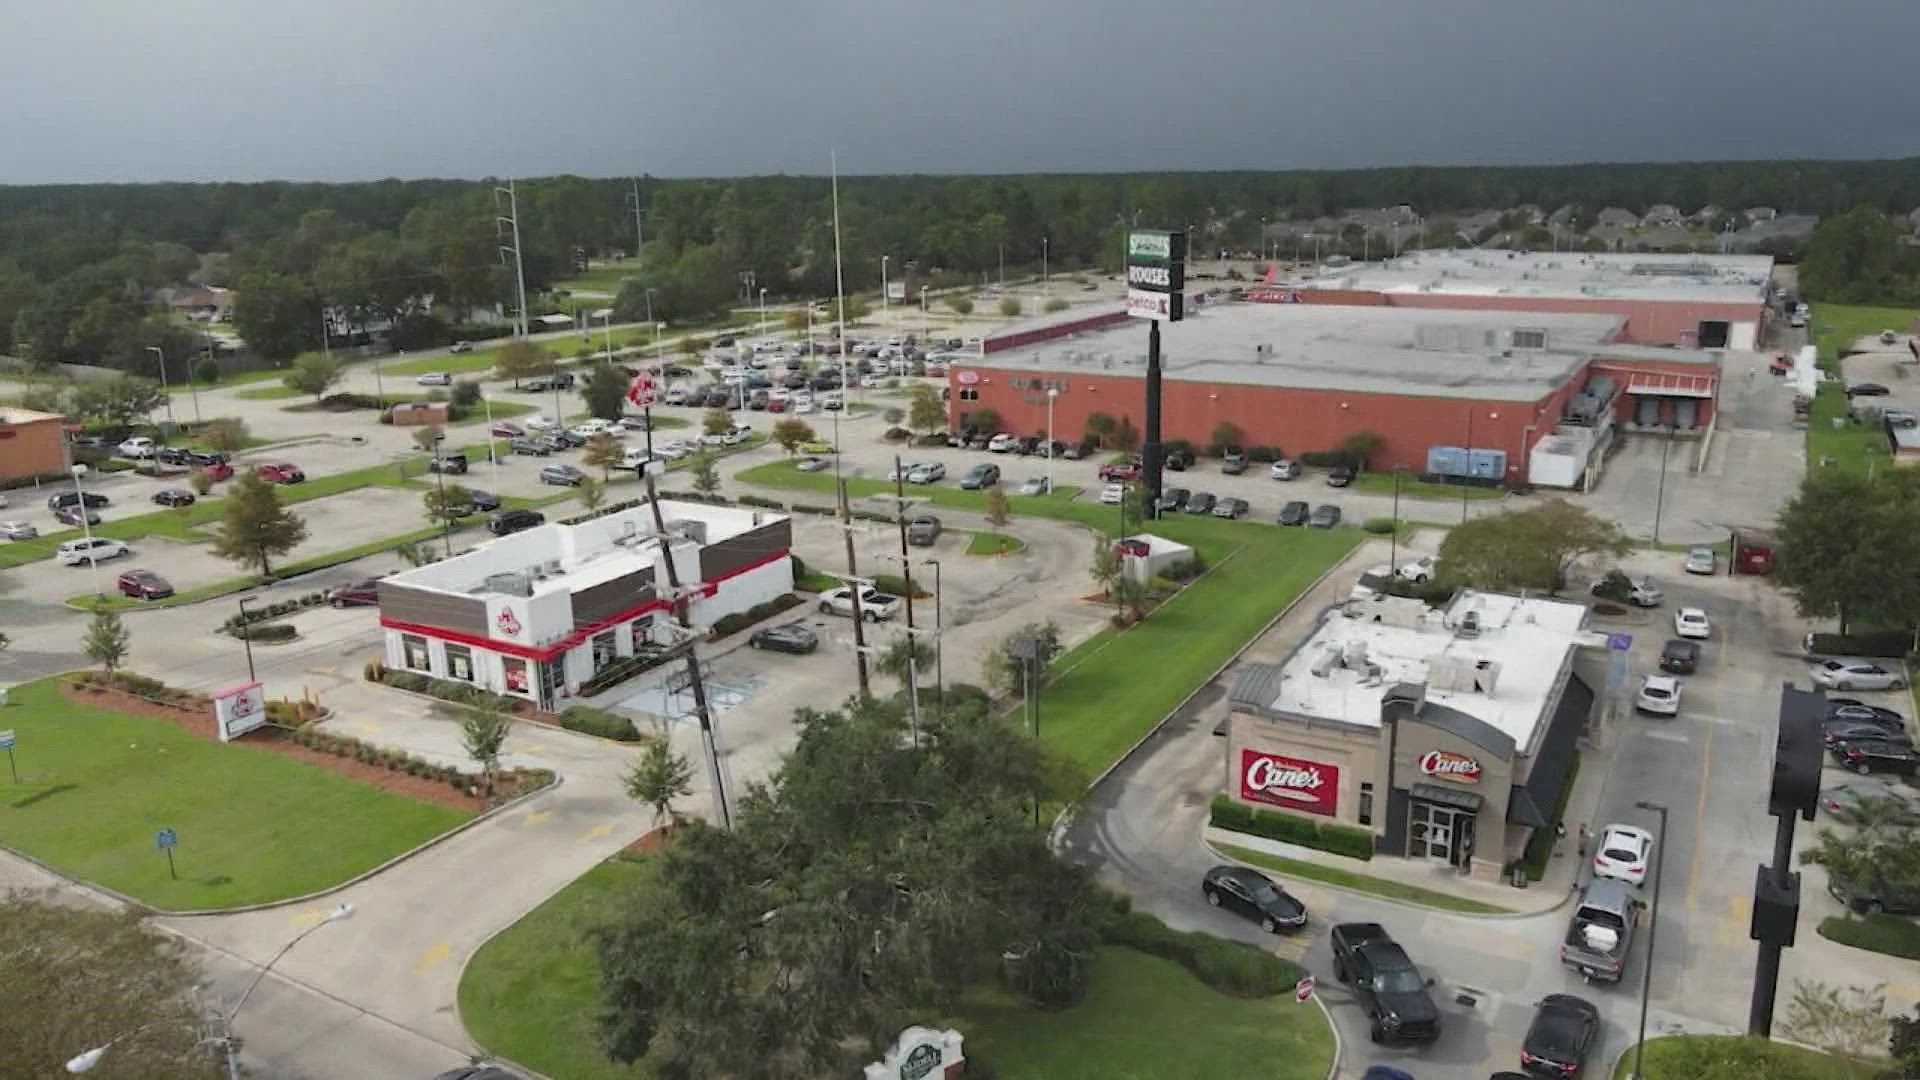 As Louisiana recovers from Hurricane Ida, there are signs of a return to normalcy in Slidell.